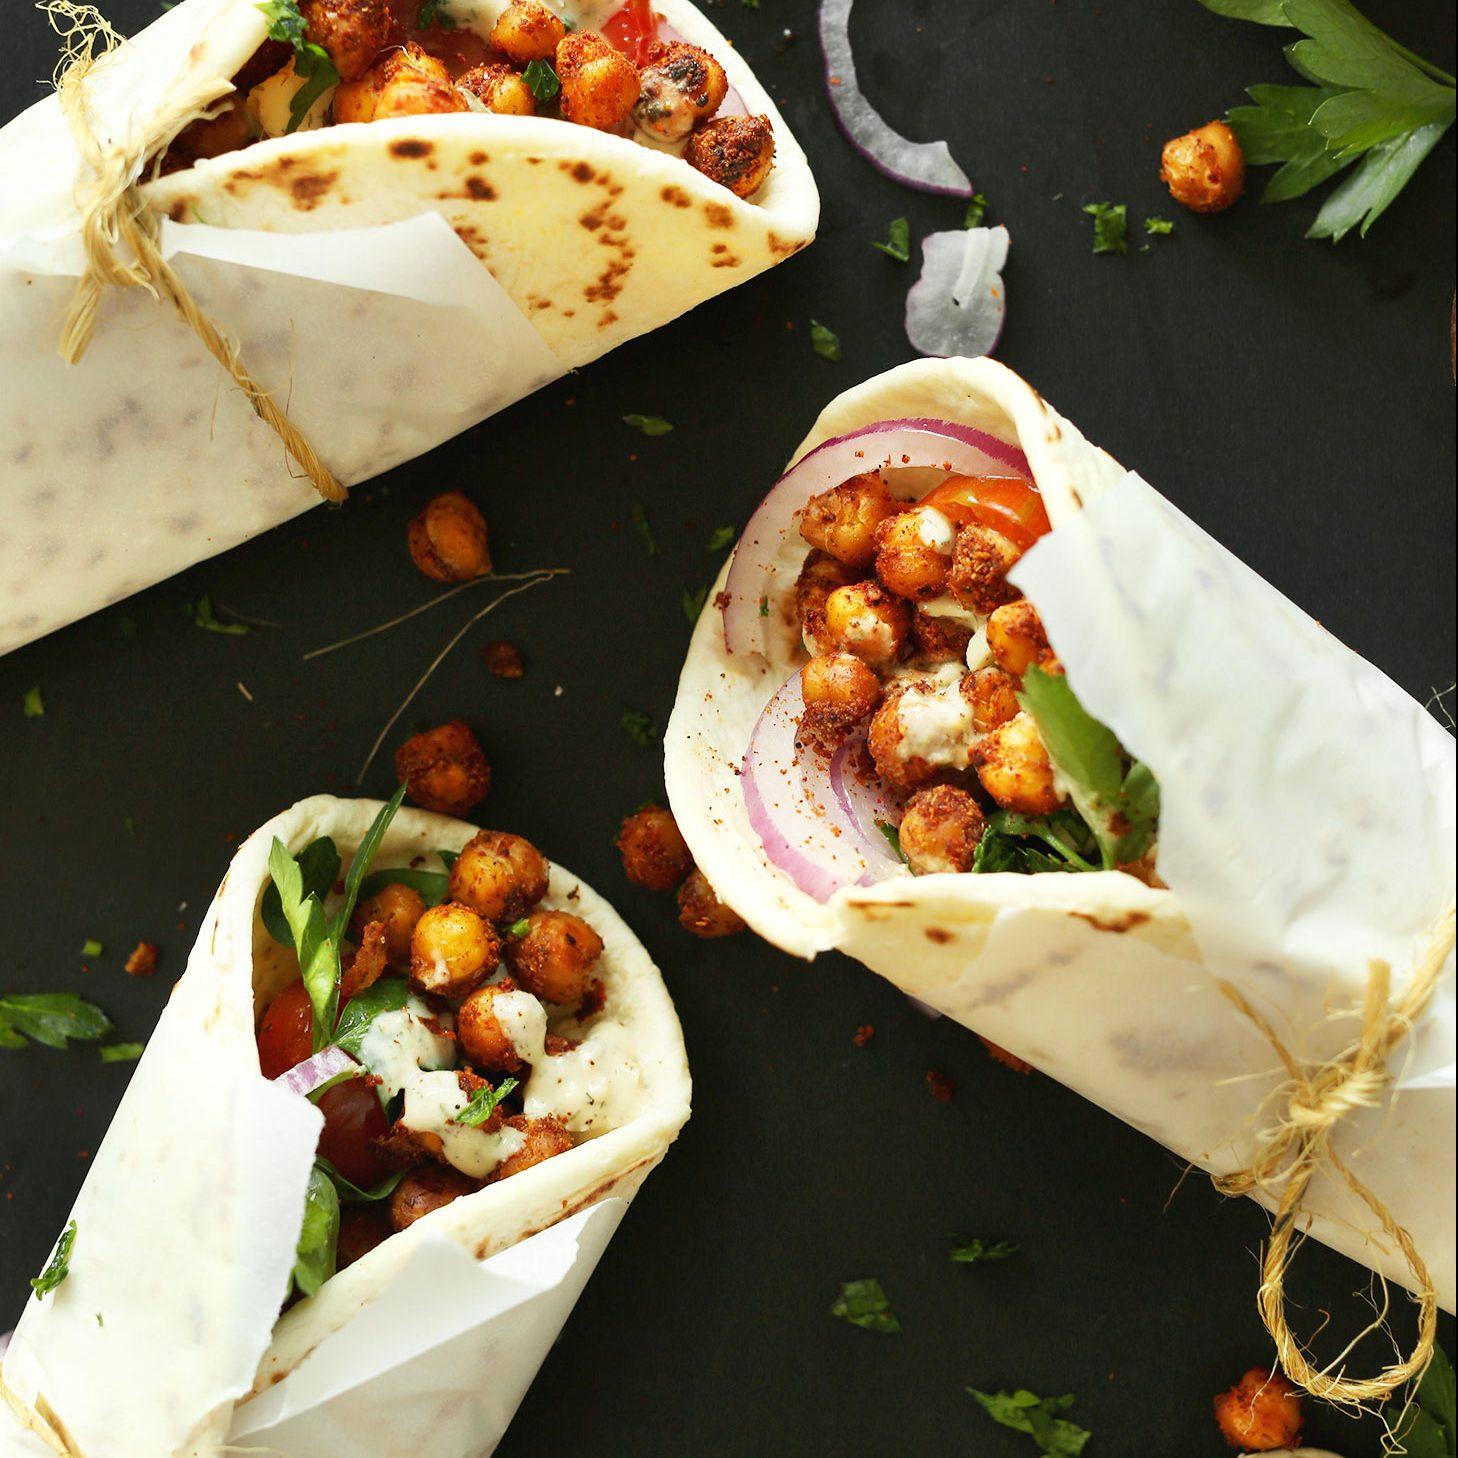 amazing-30-minute-healthy-chickpea-shawarma-wraps-with-a-simple-garlic-dill-sauce-an-easy-weeknight-vegan-plantbased-meal-healthy-recipe-mediterranean-minimalistbaker